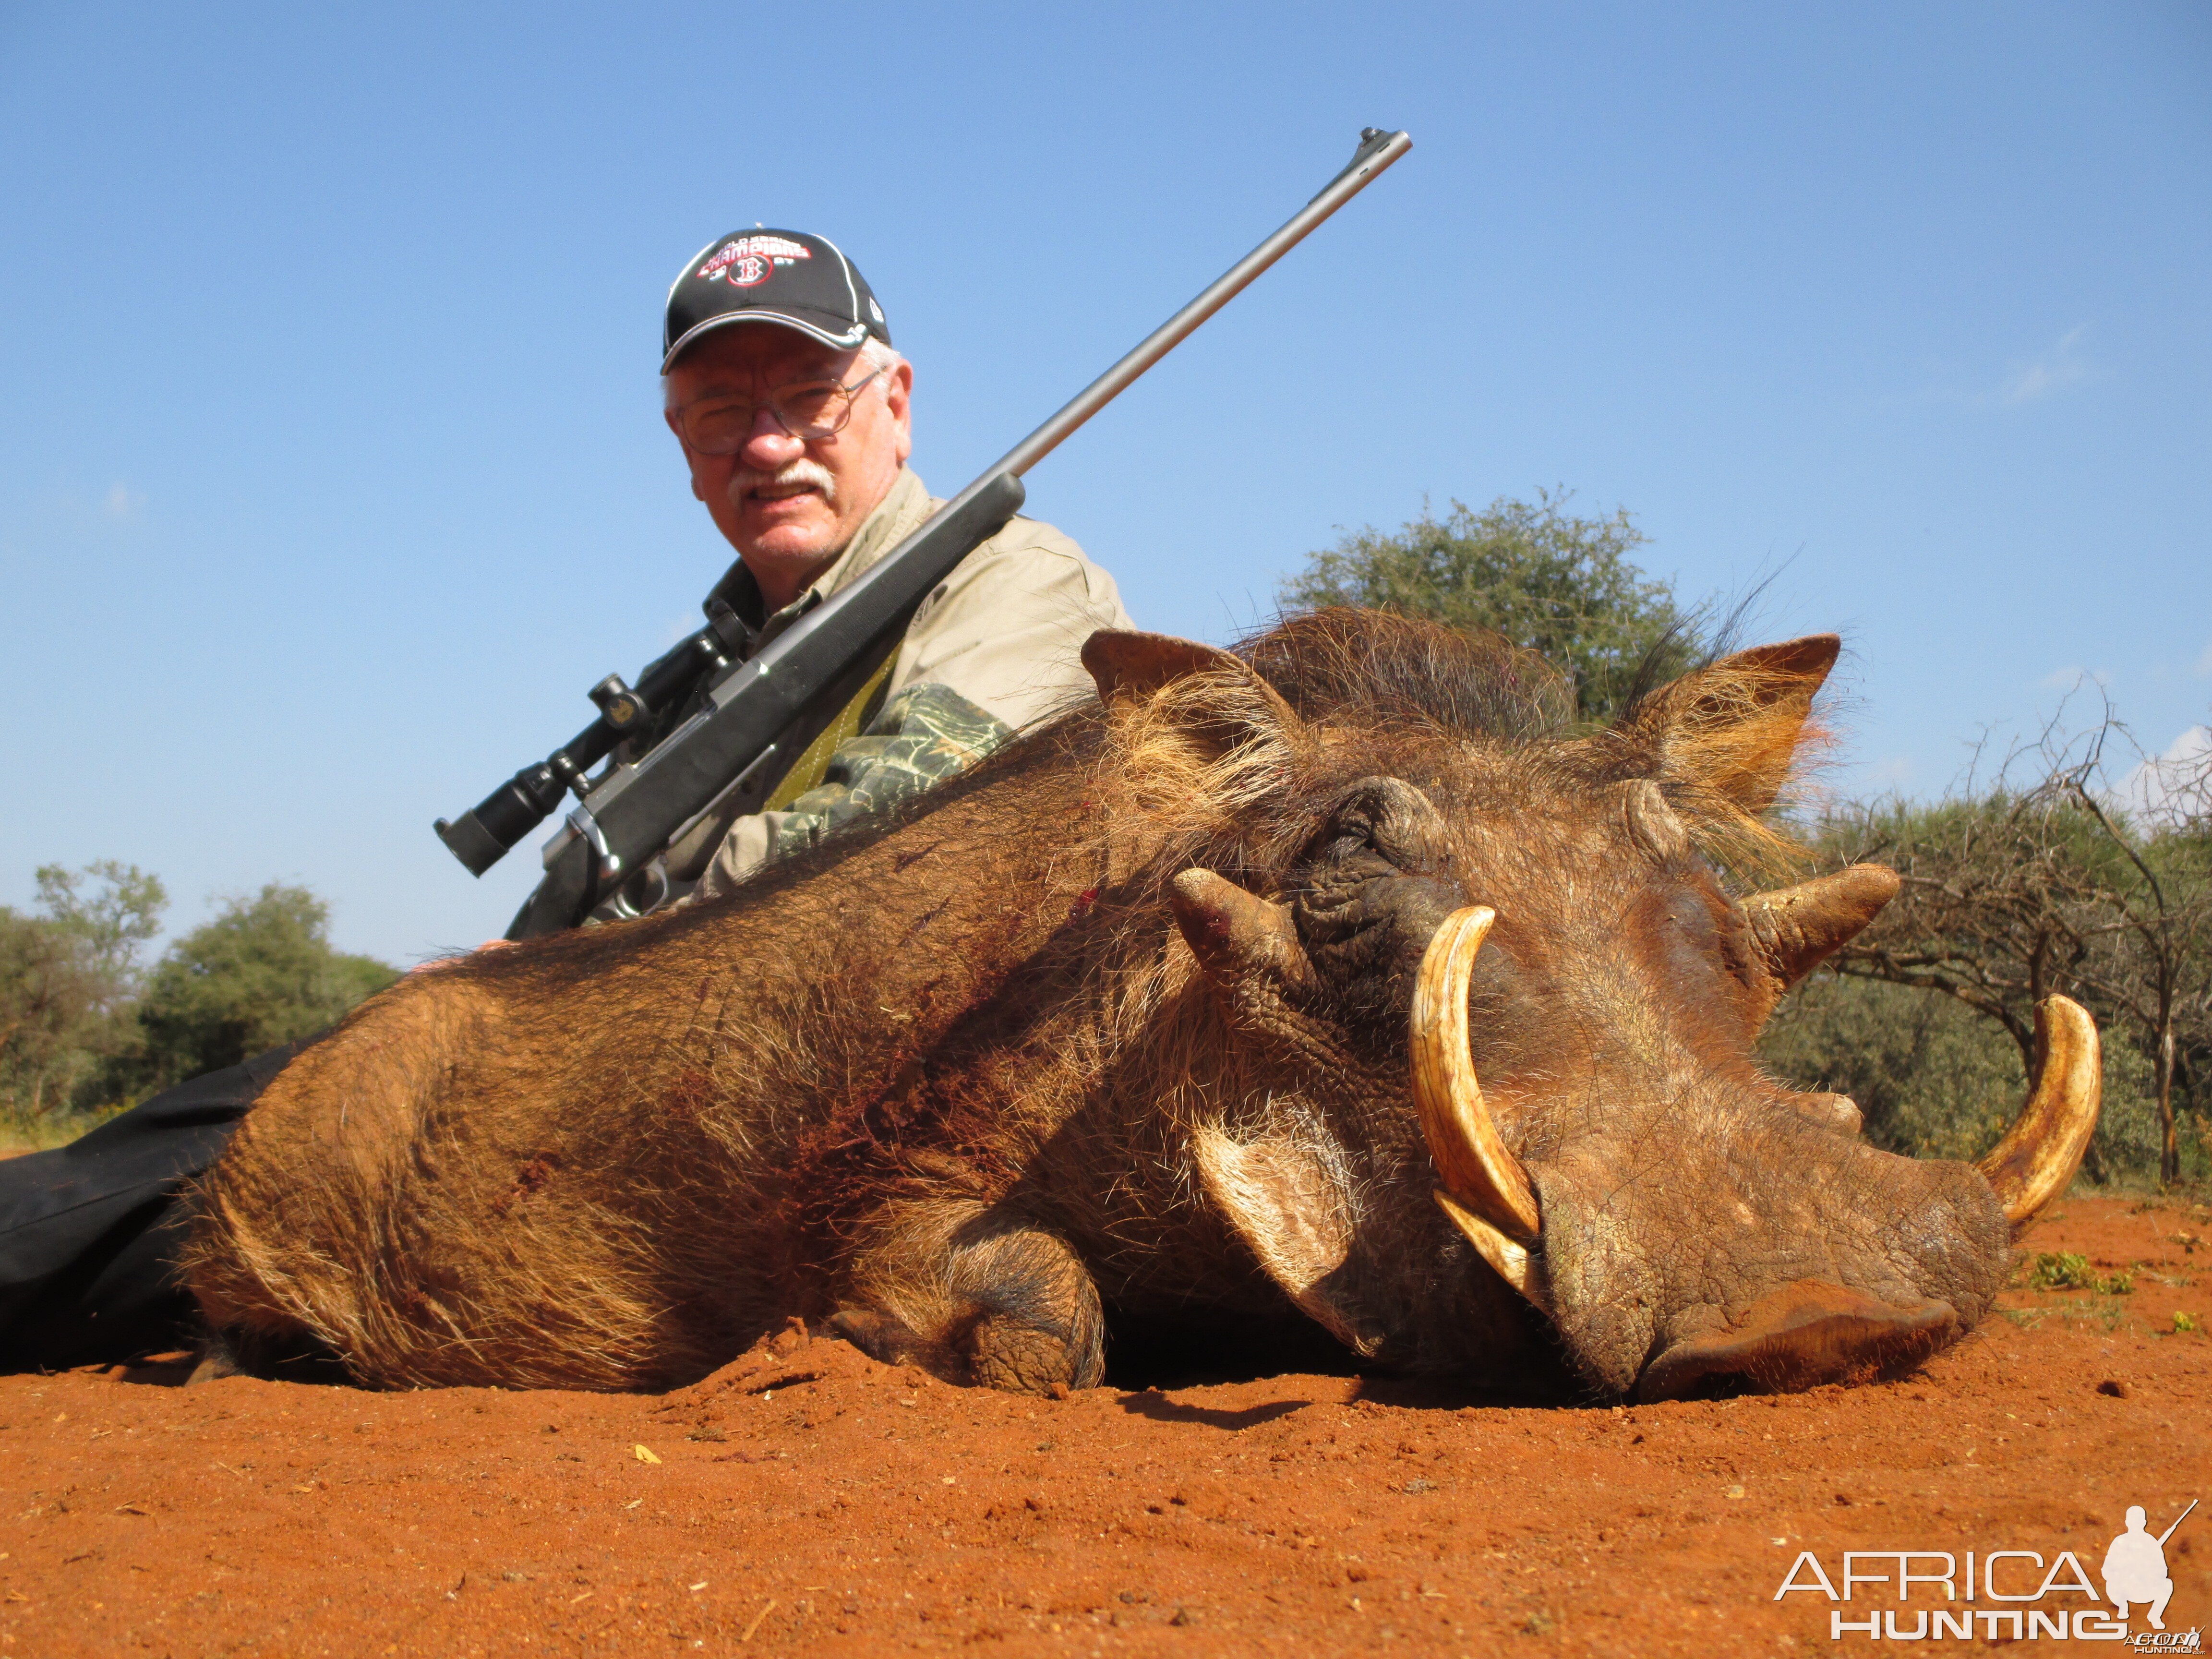 The biggest, meanest warthog of the two I took.